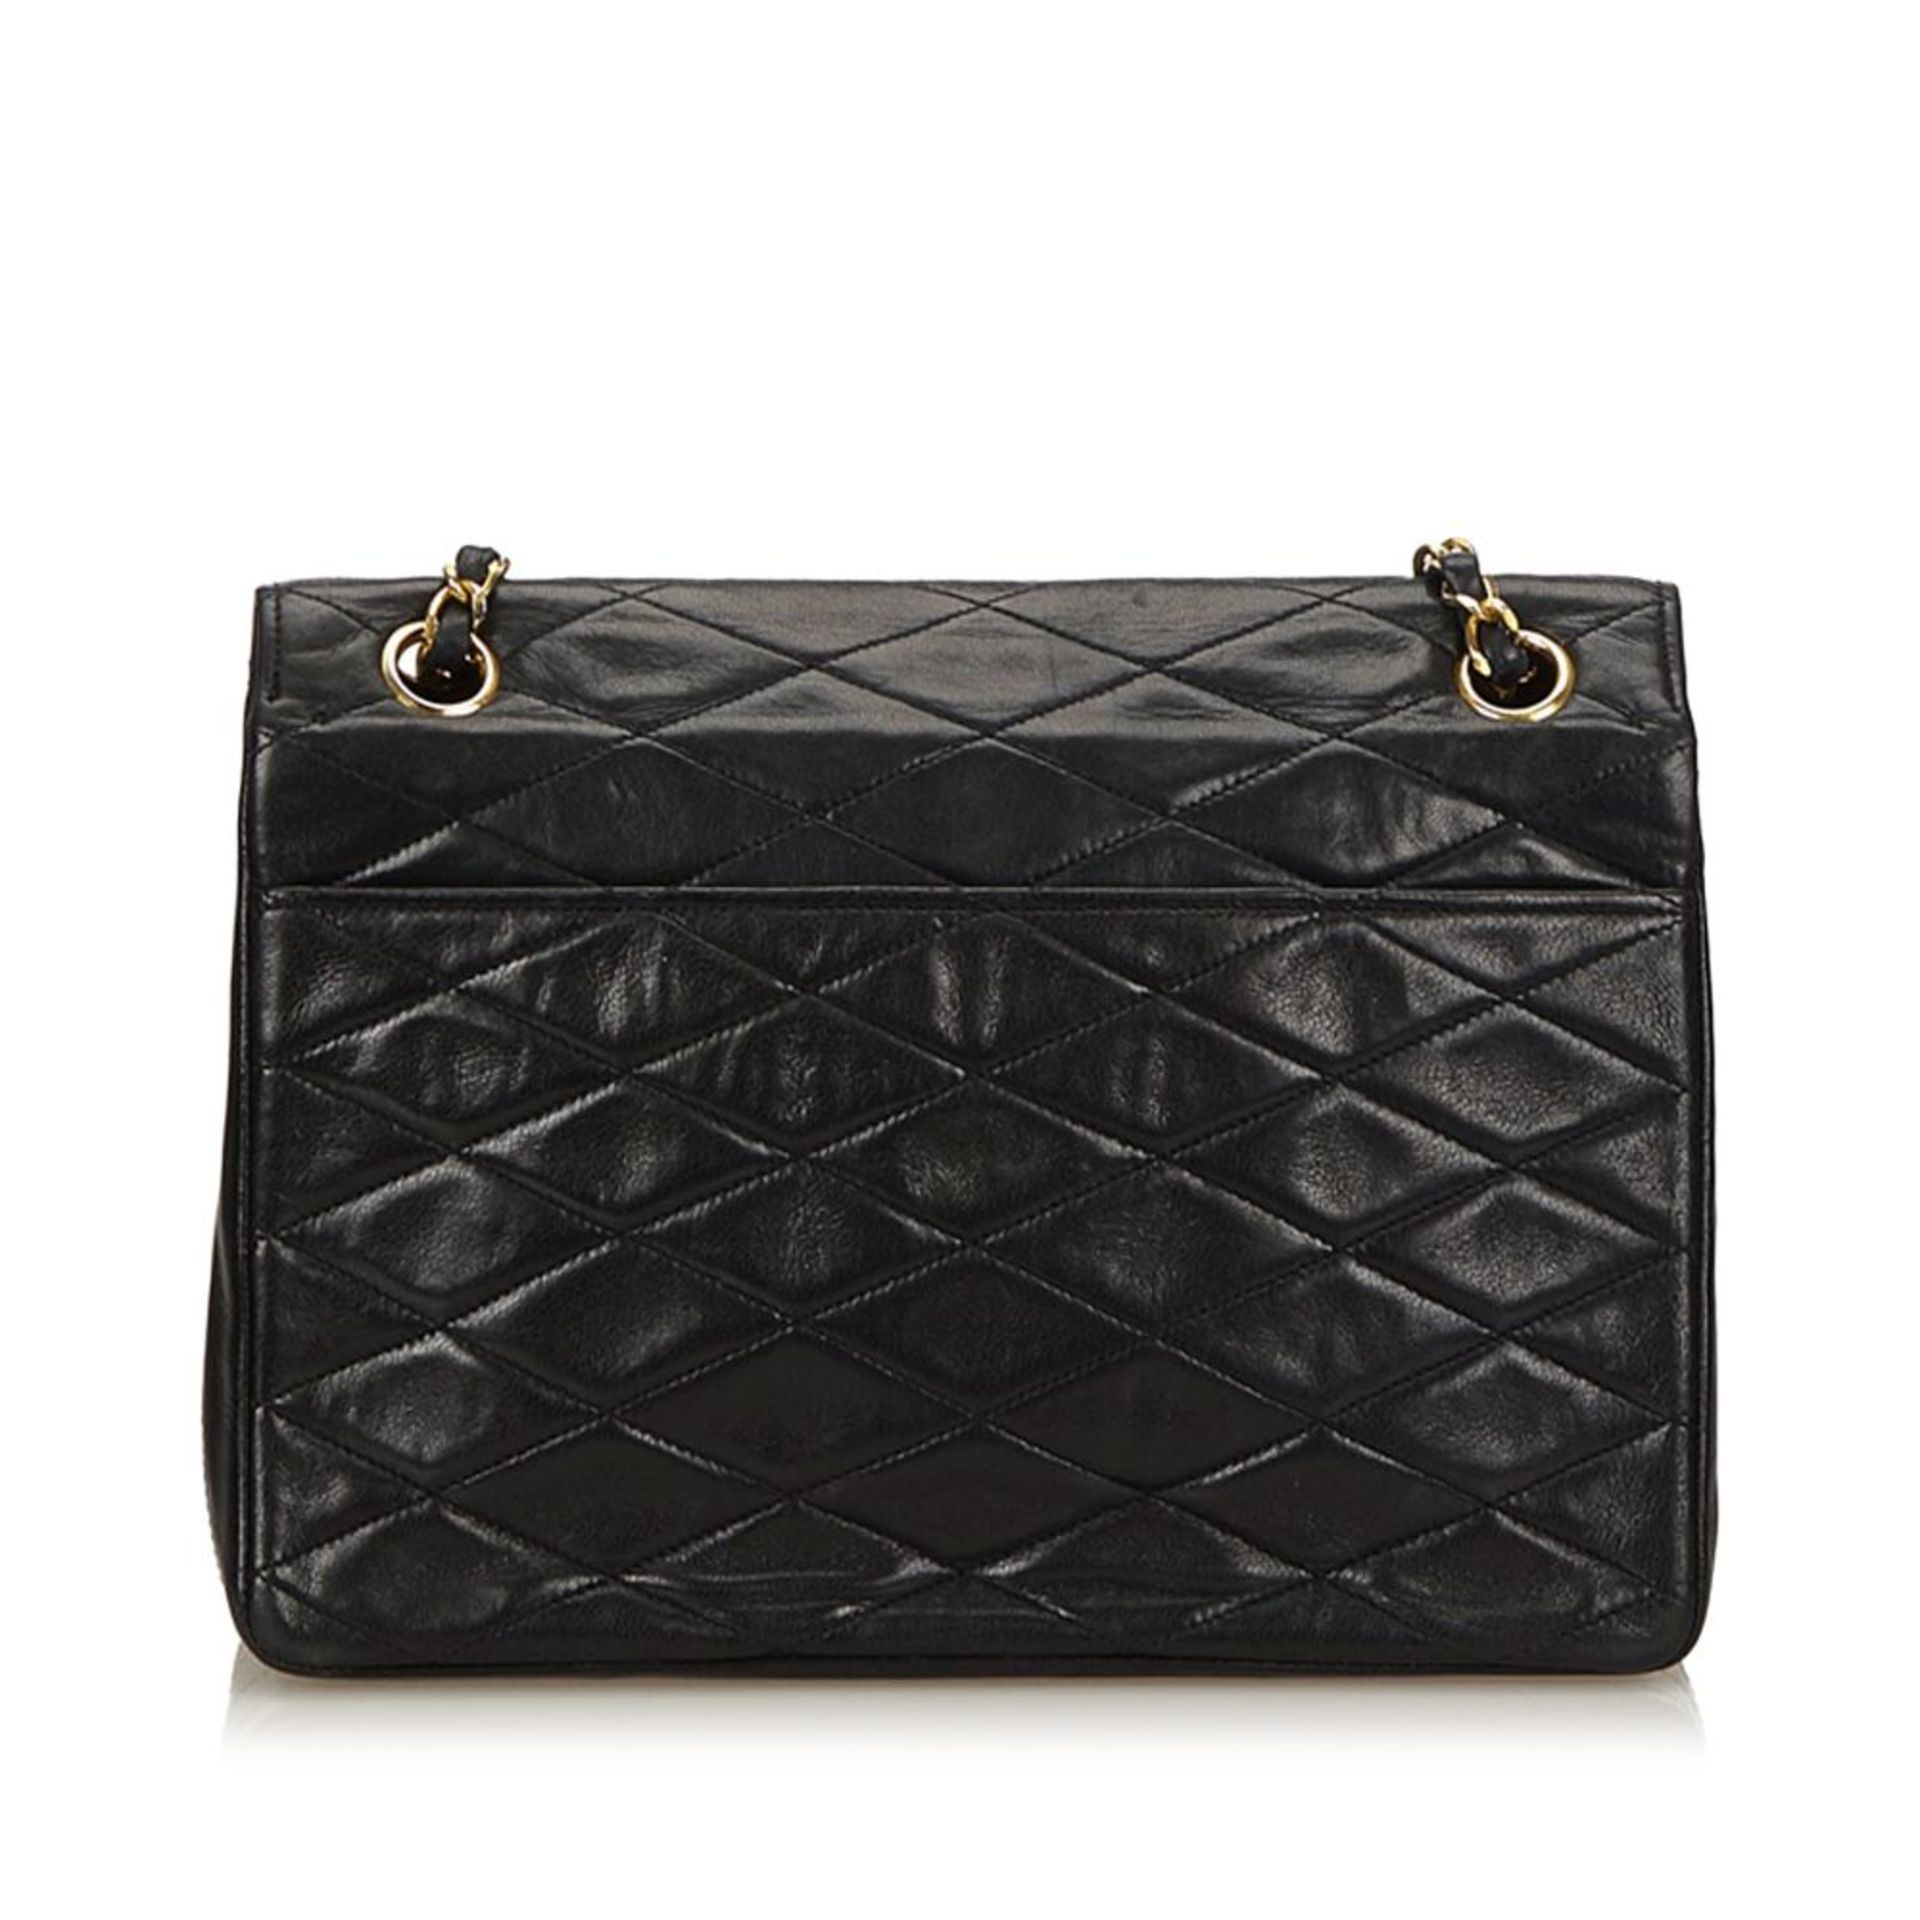 A Chanel matelassé leather chain flap bag,featuring a leather body, exterior back open pocket, - Image 3 of 5